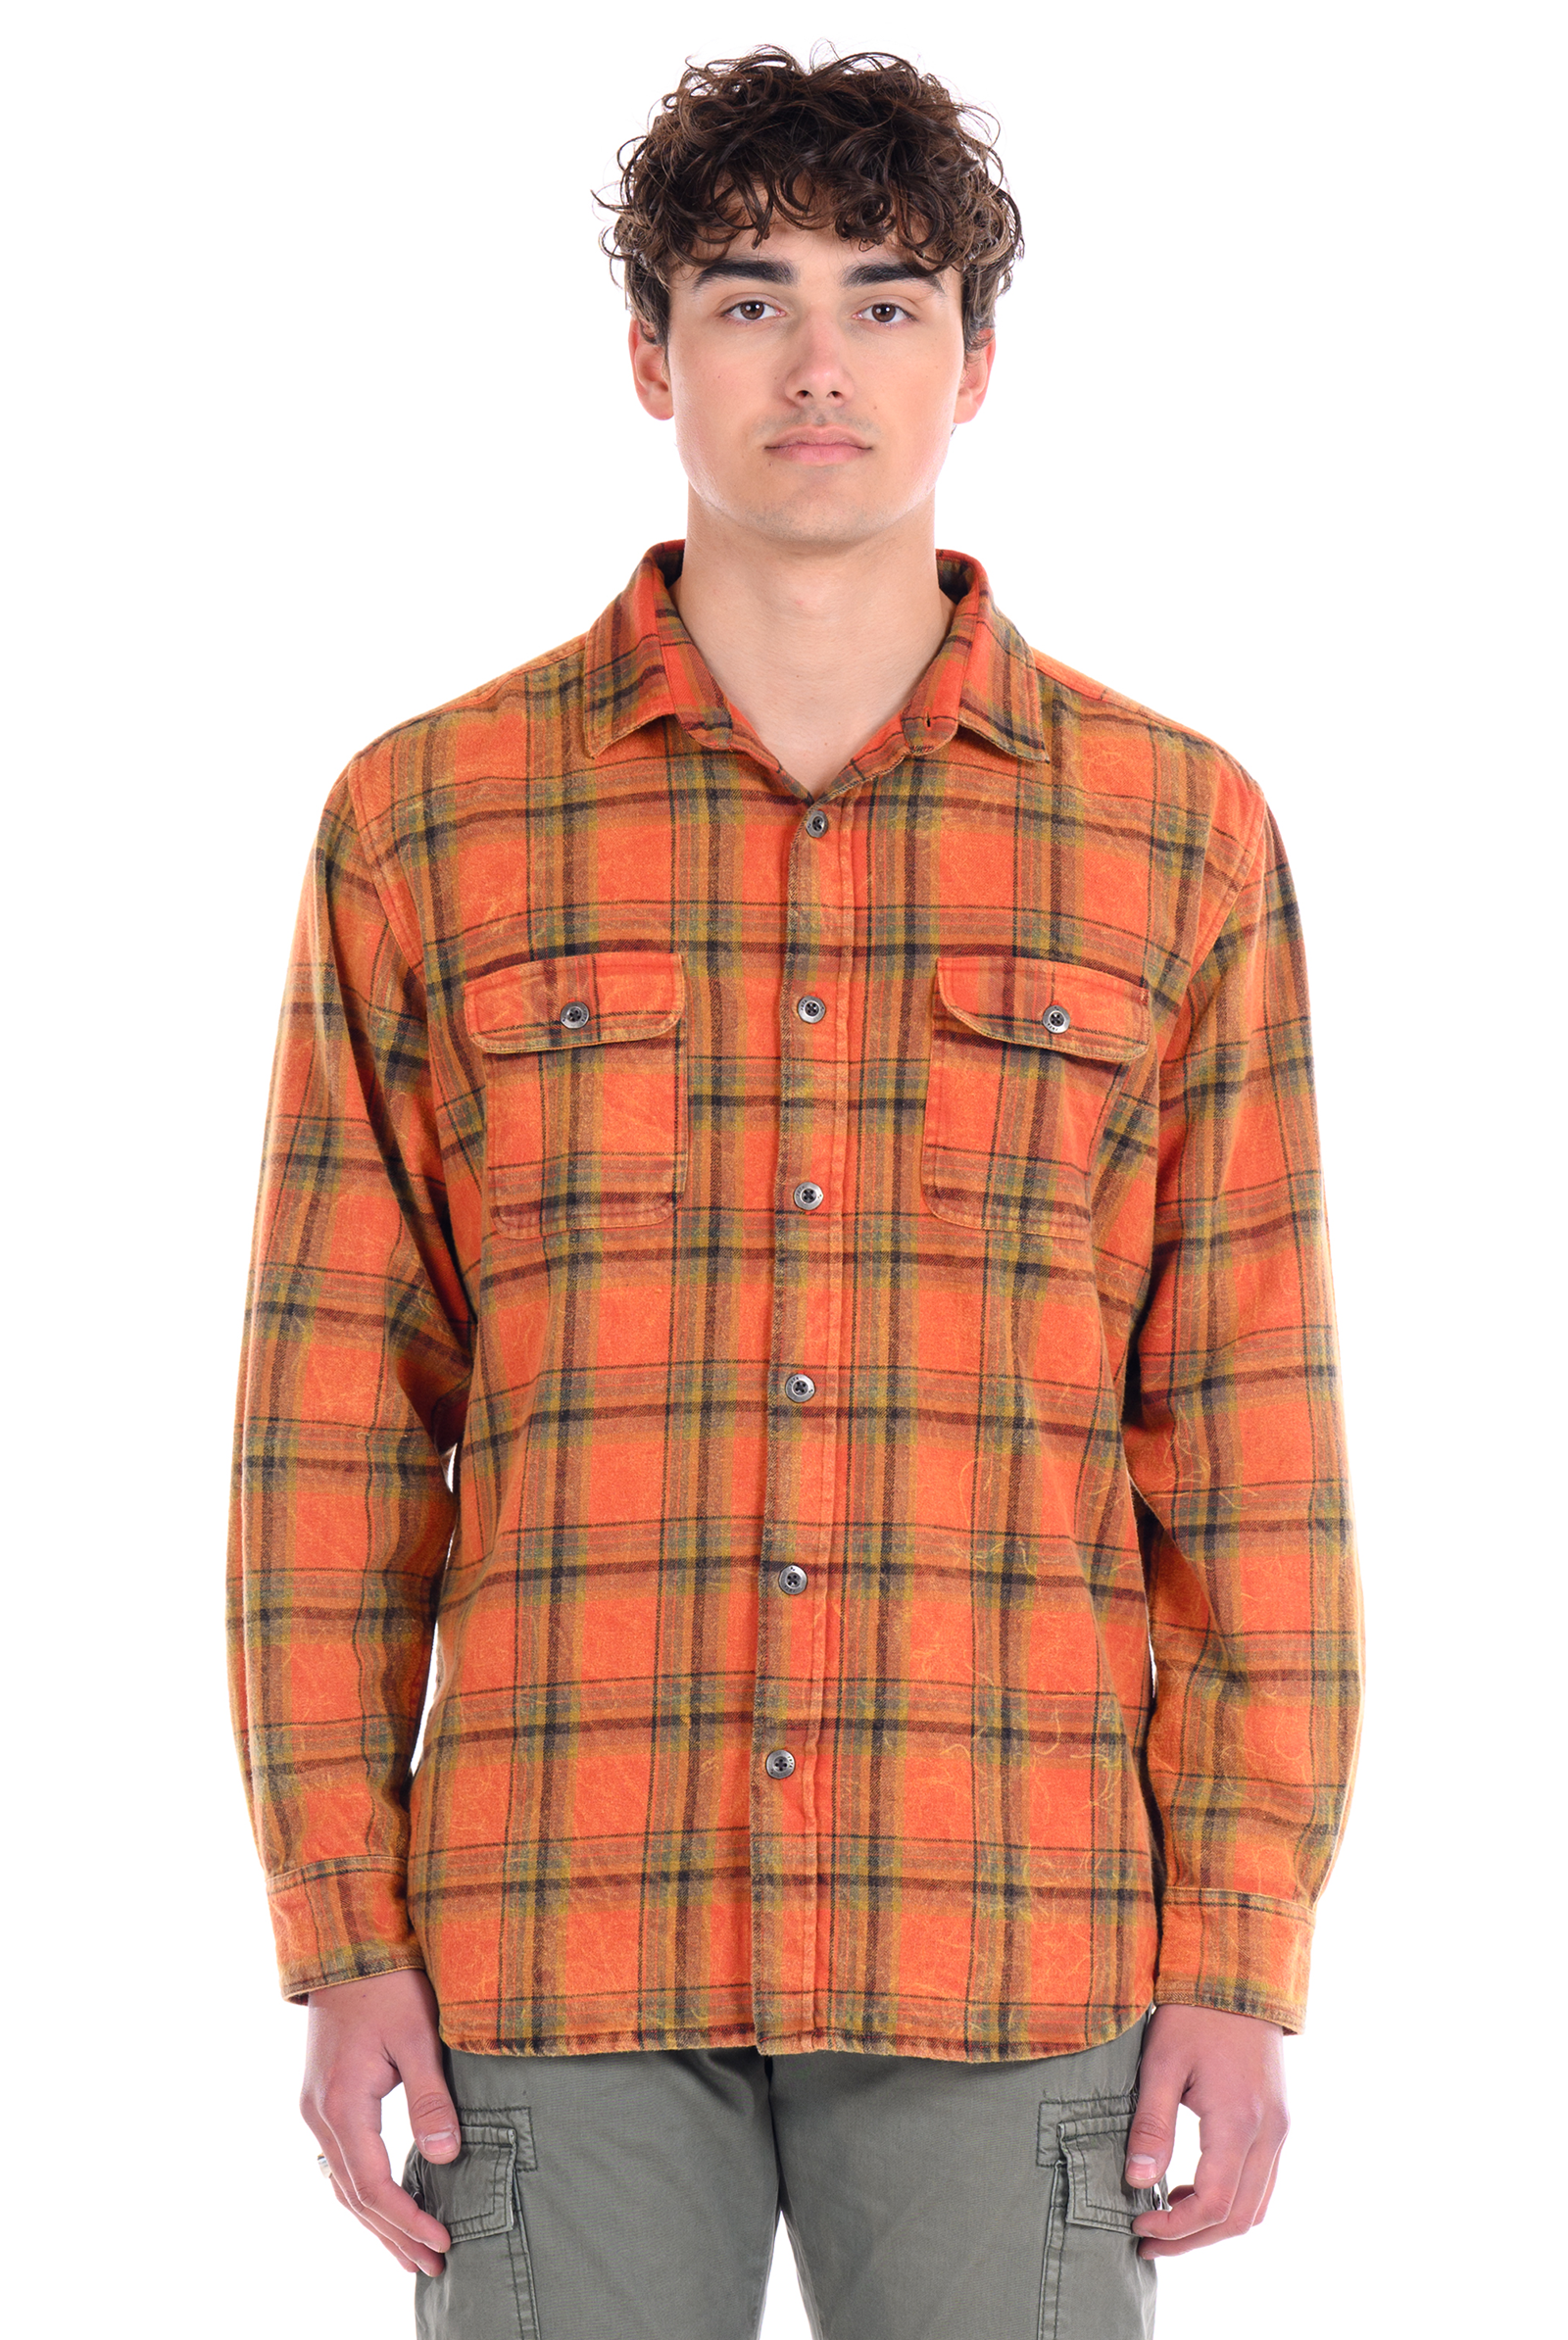 Aspen Mineral Wash Flannel Shirt-Men's Tops-Vixen Collection, Day Spa and Women's Boutique Located in Seattle, Washington